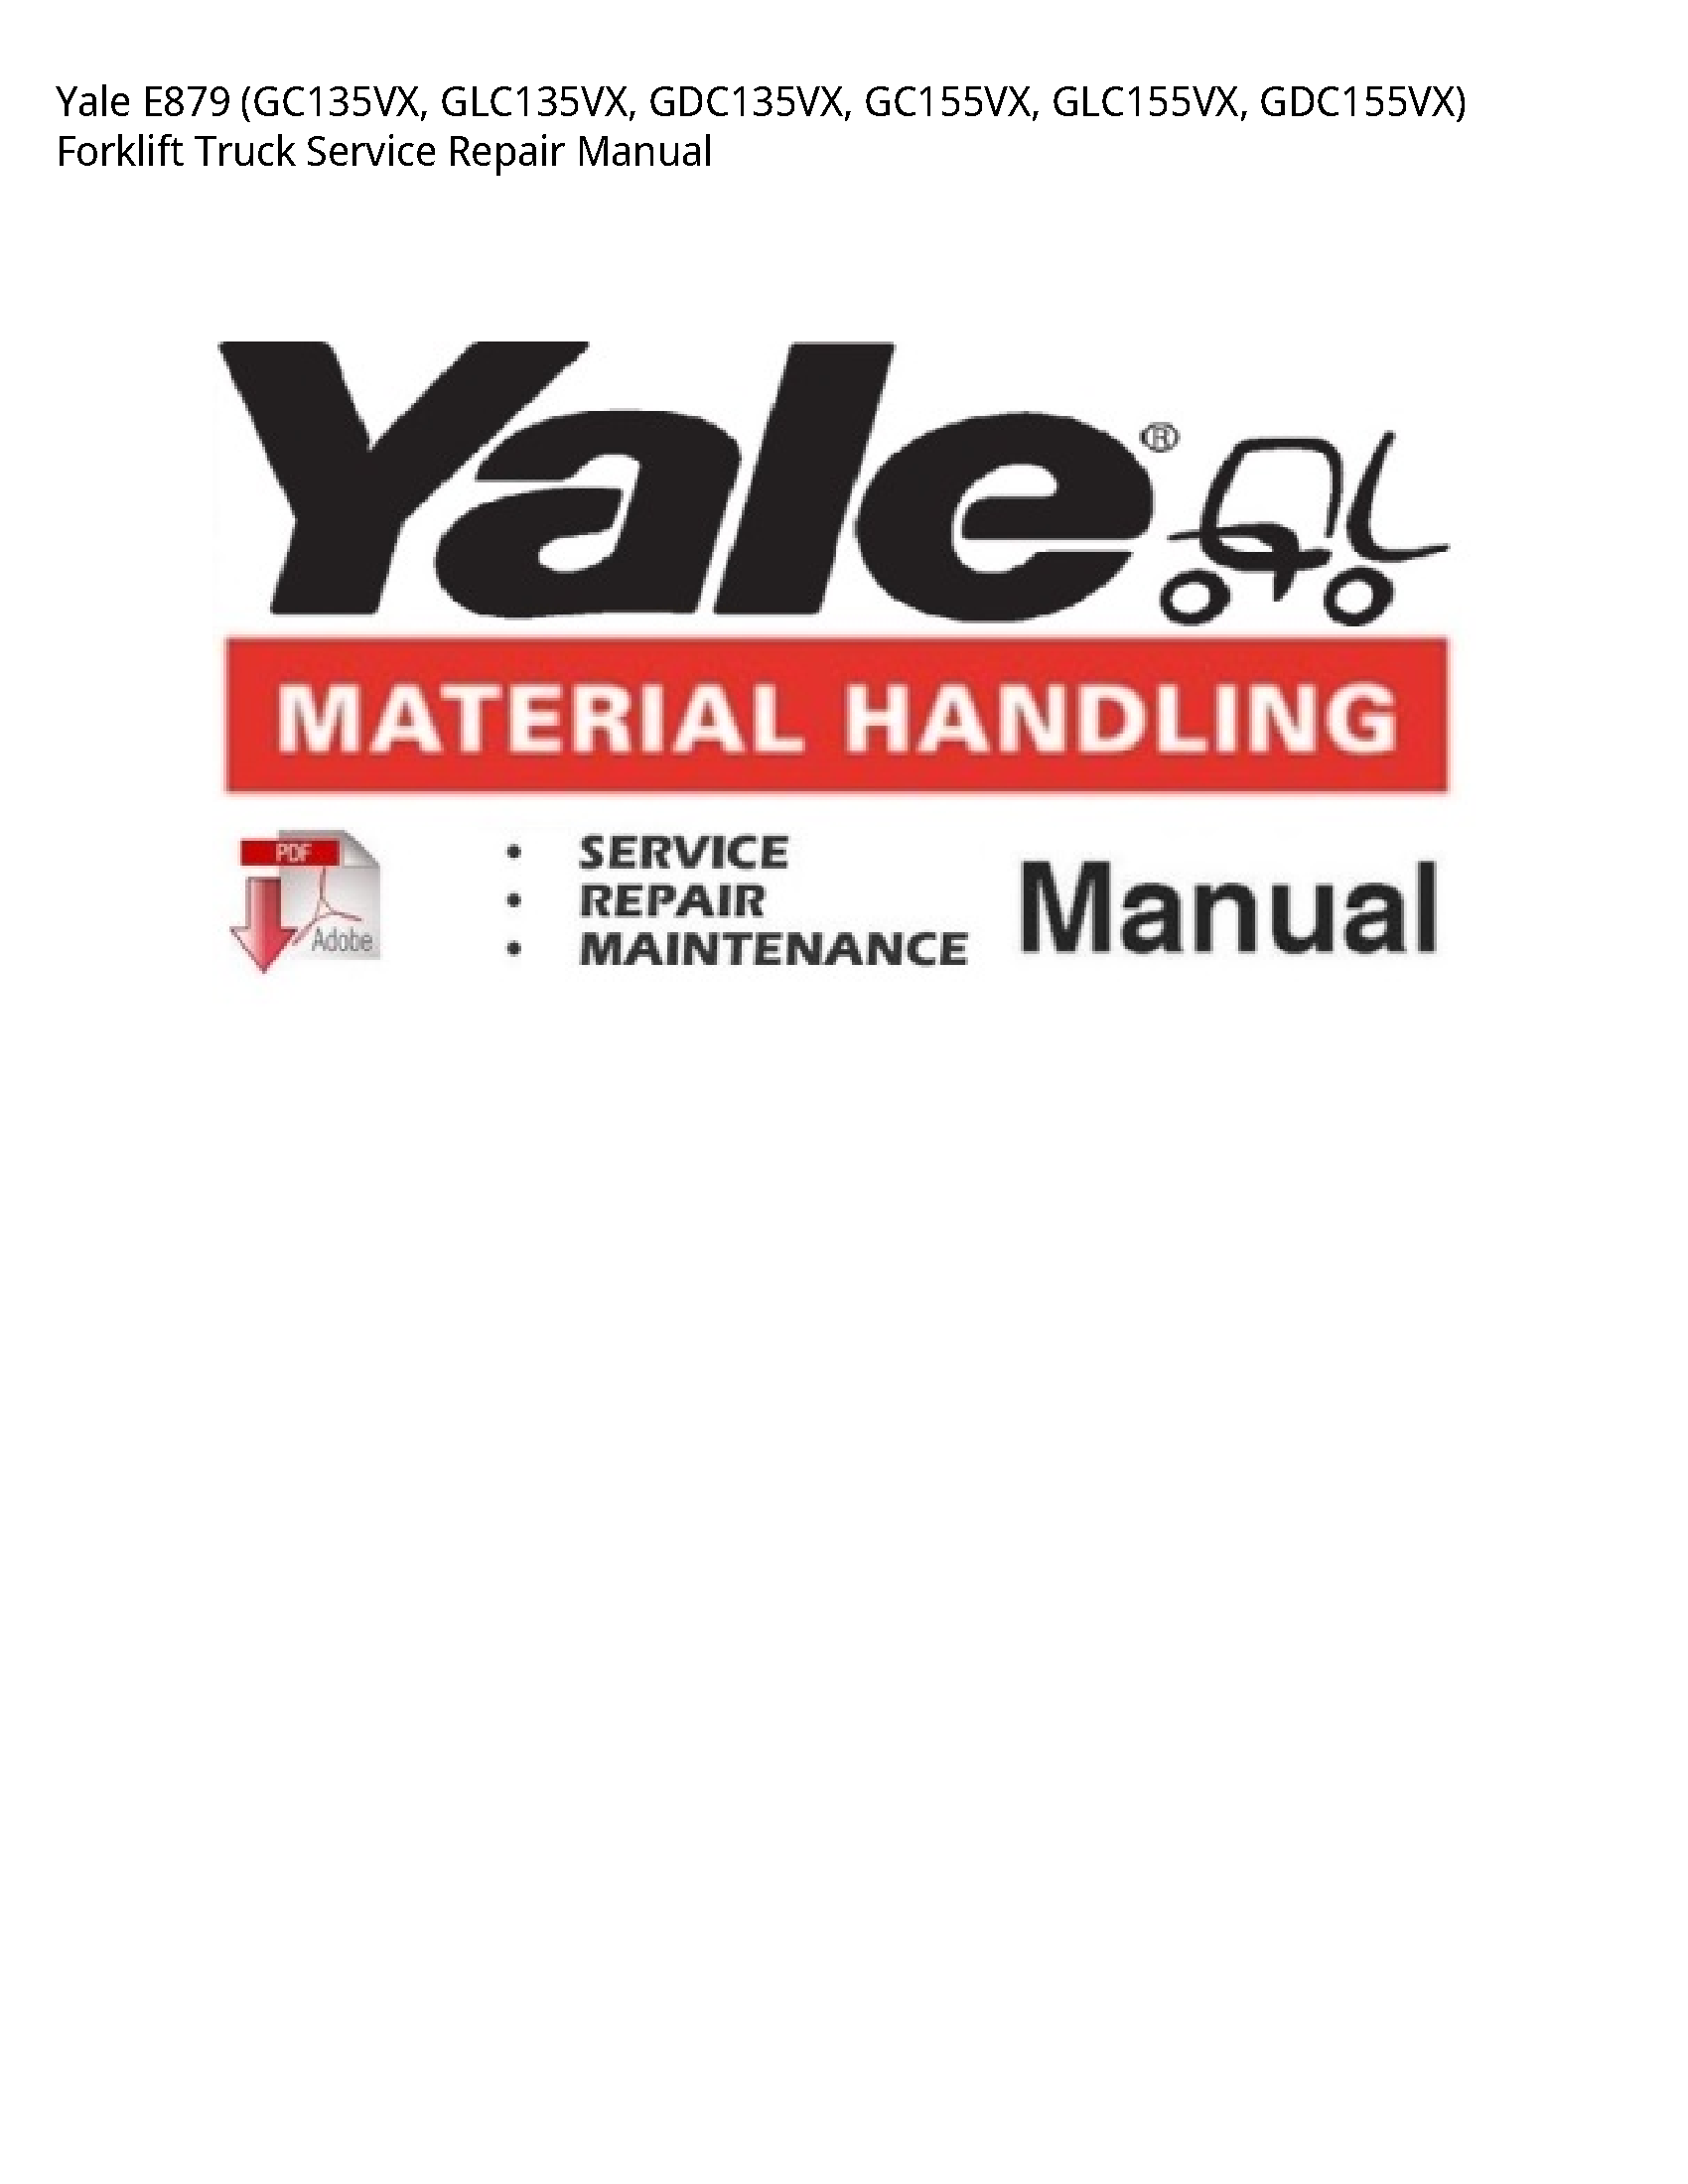 Yale E879 Forklift Truck manual